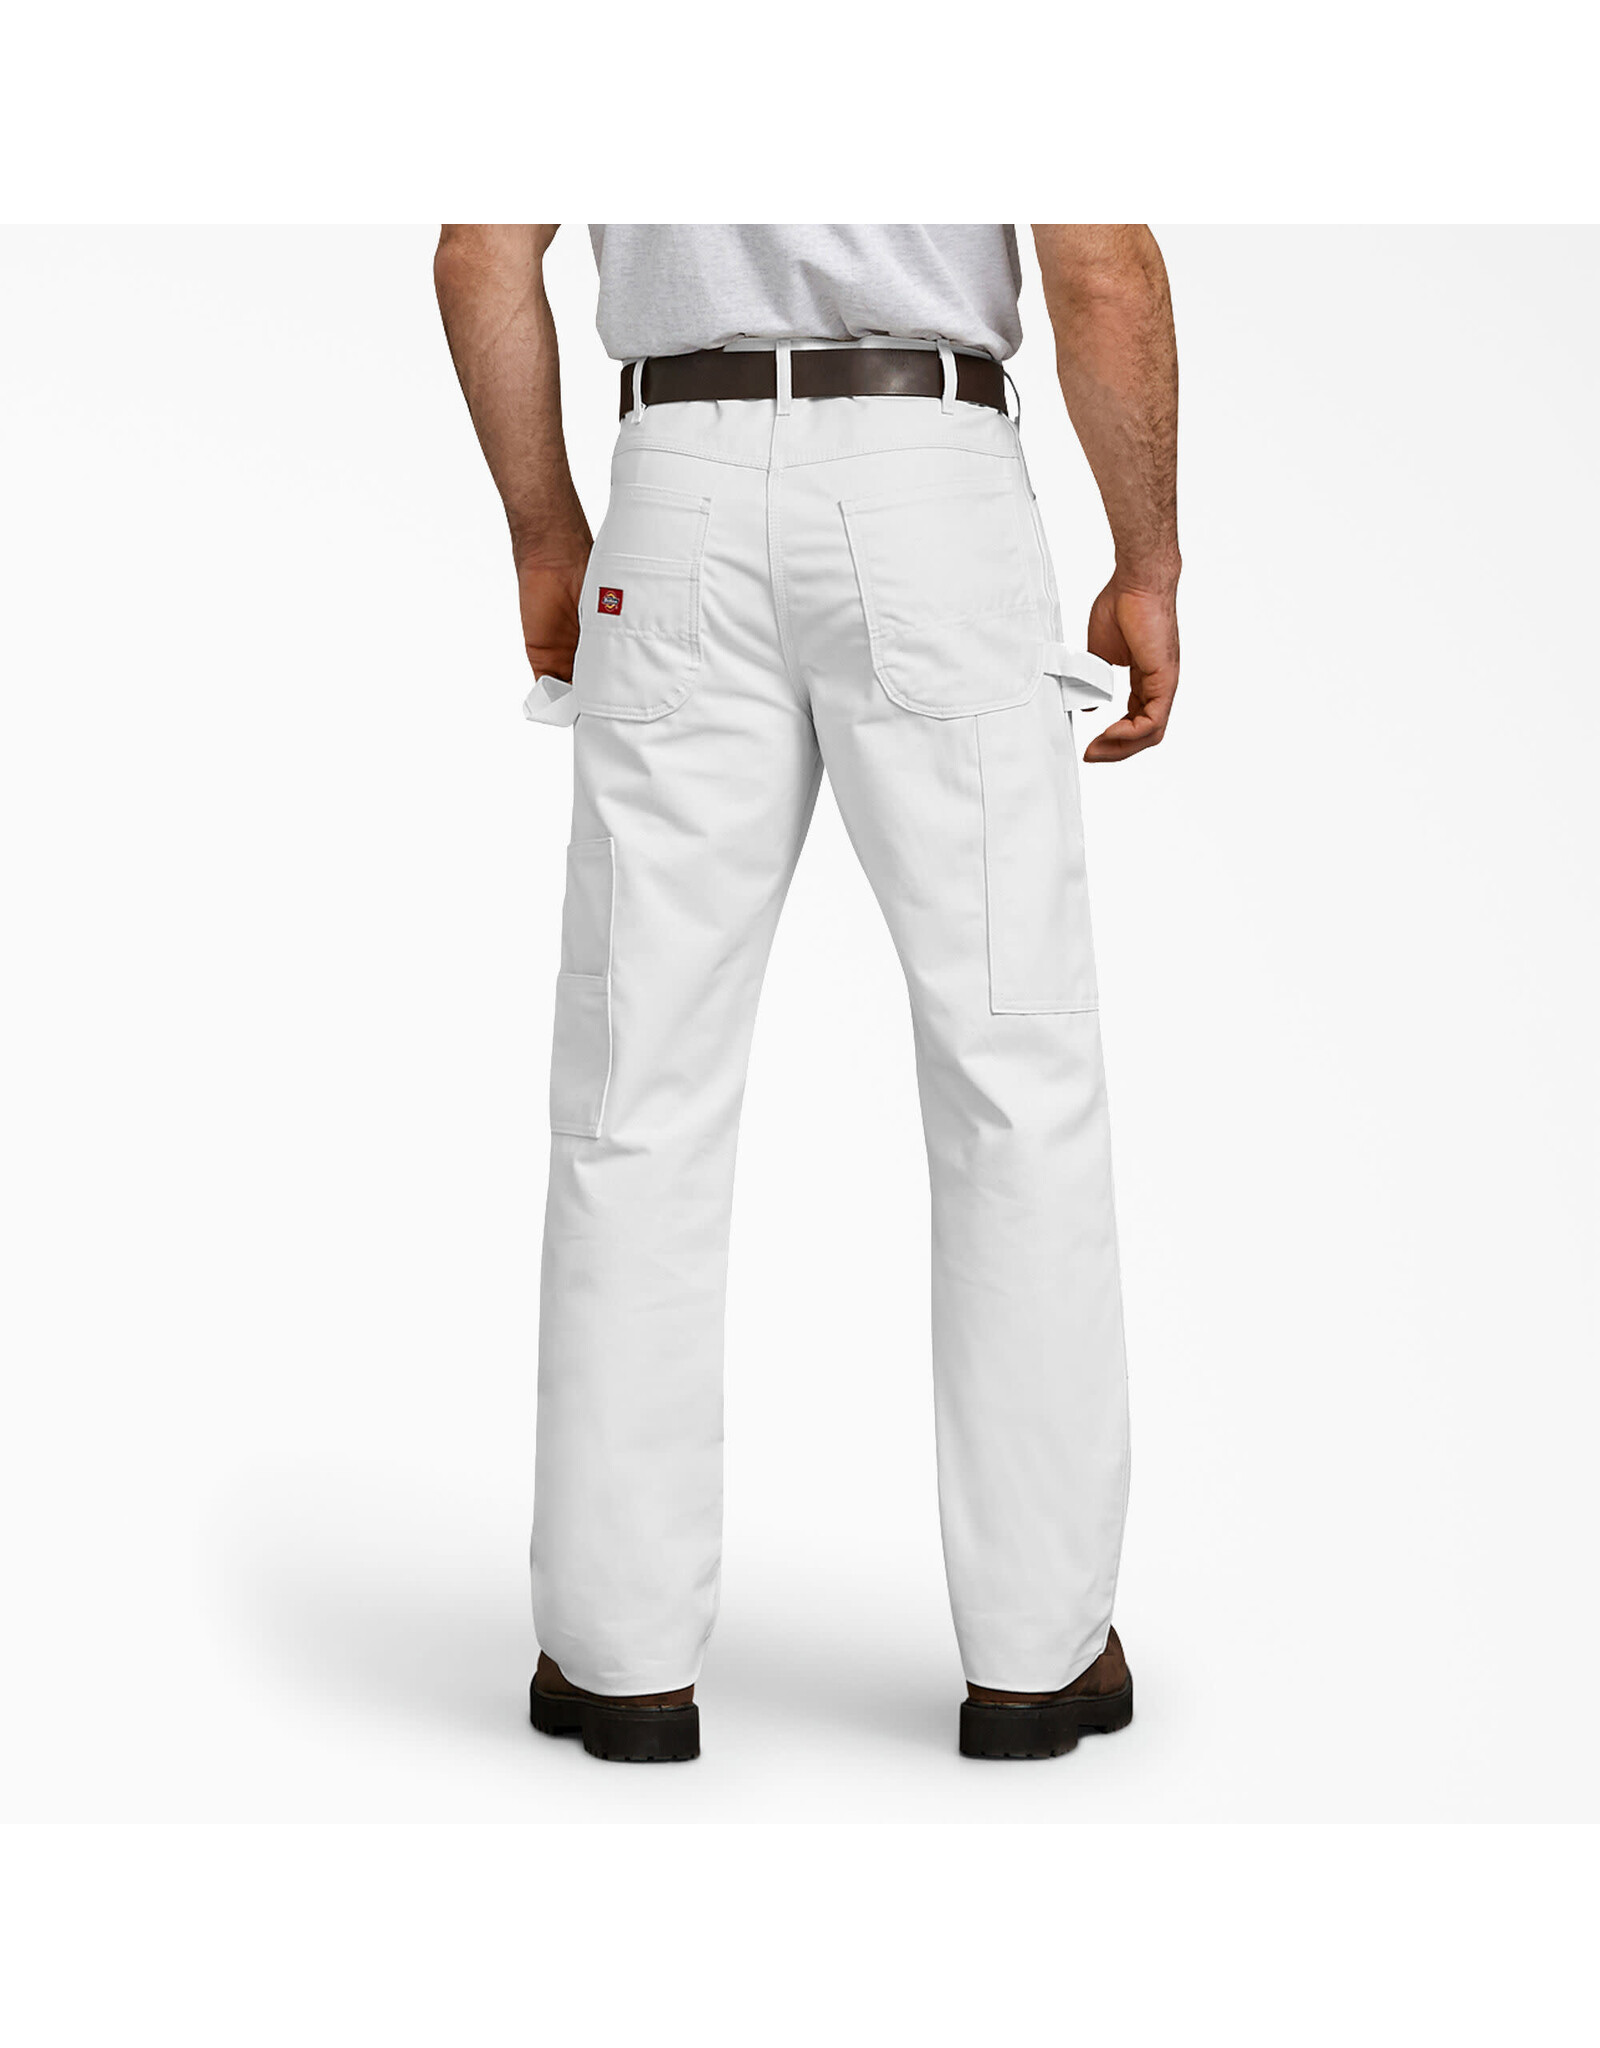 DICKIES Painter's Double Knee Utility Pants White - 2053WH